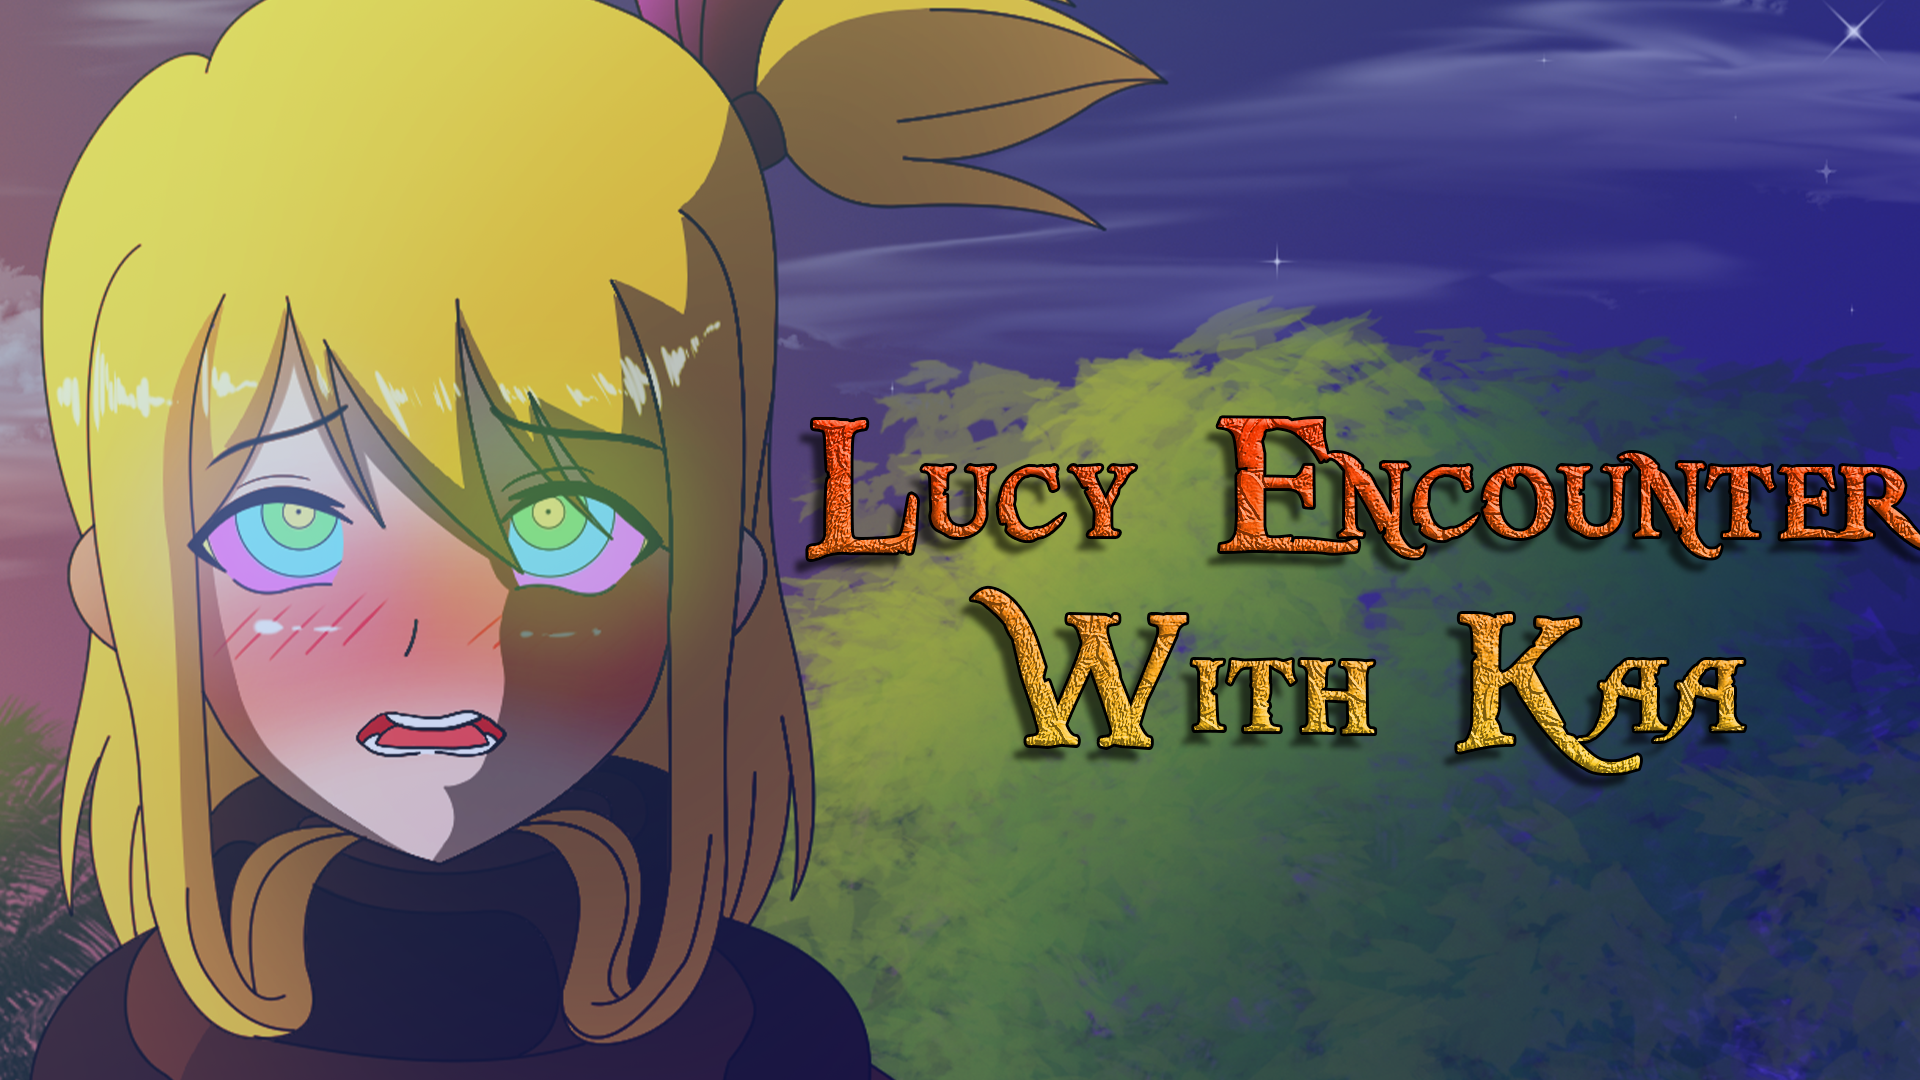 Lucy Encounter With Kaa Parody Full Animation See more ideas about kaa the snake, jungle book, jungle book disney. lucy encounter with kaa parody full